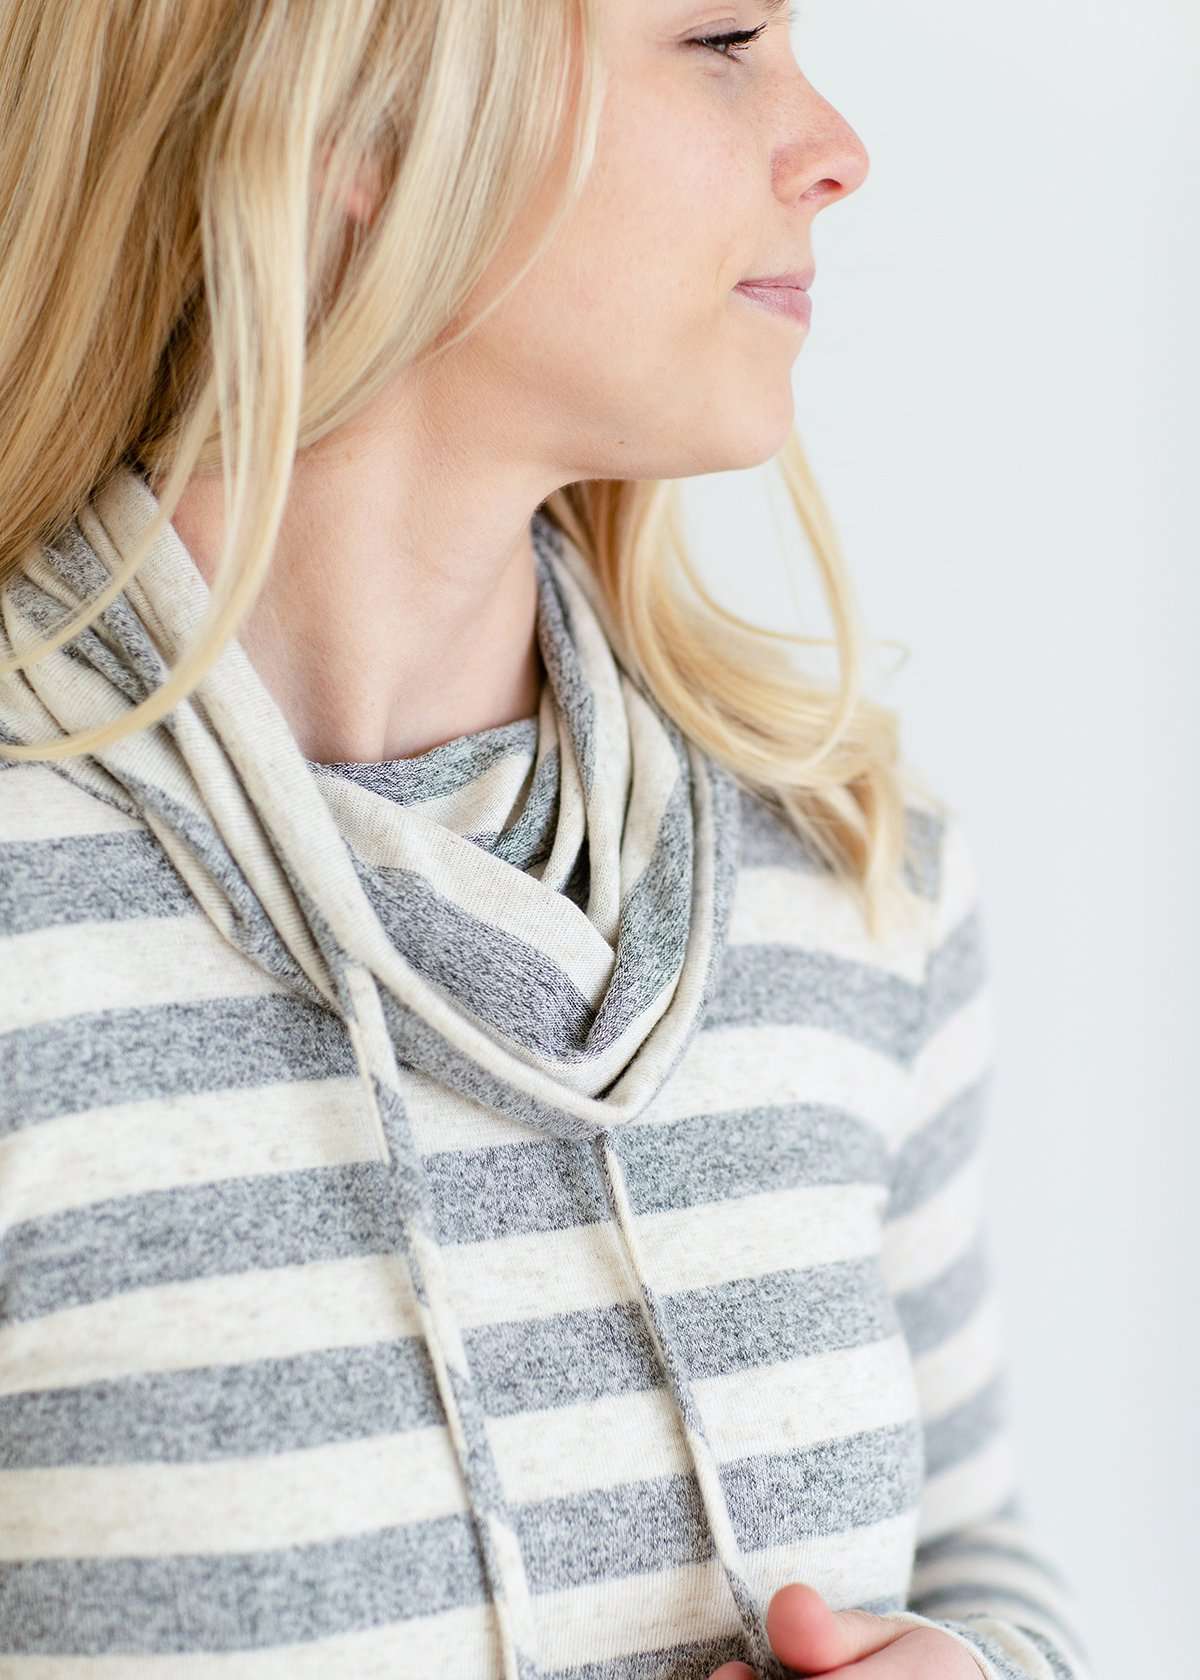 Woman wearing a modest gray and white striped cowl neck pullover top.